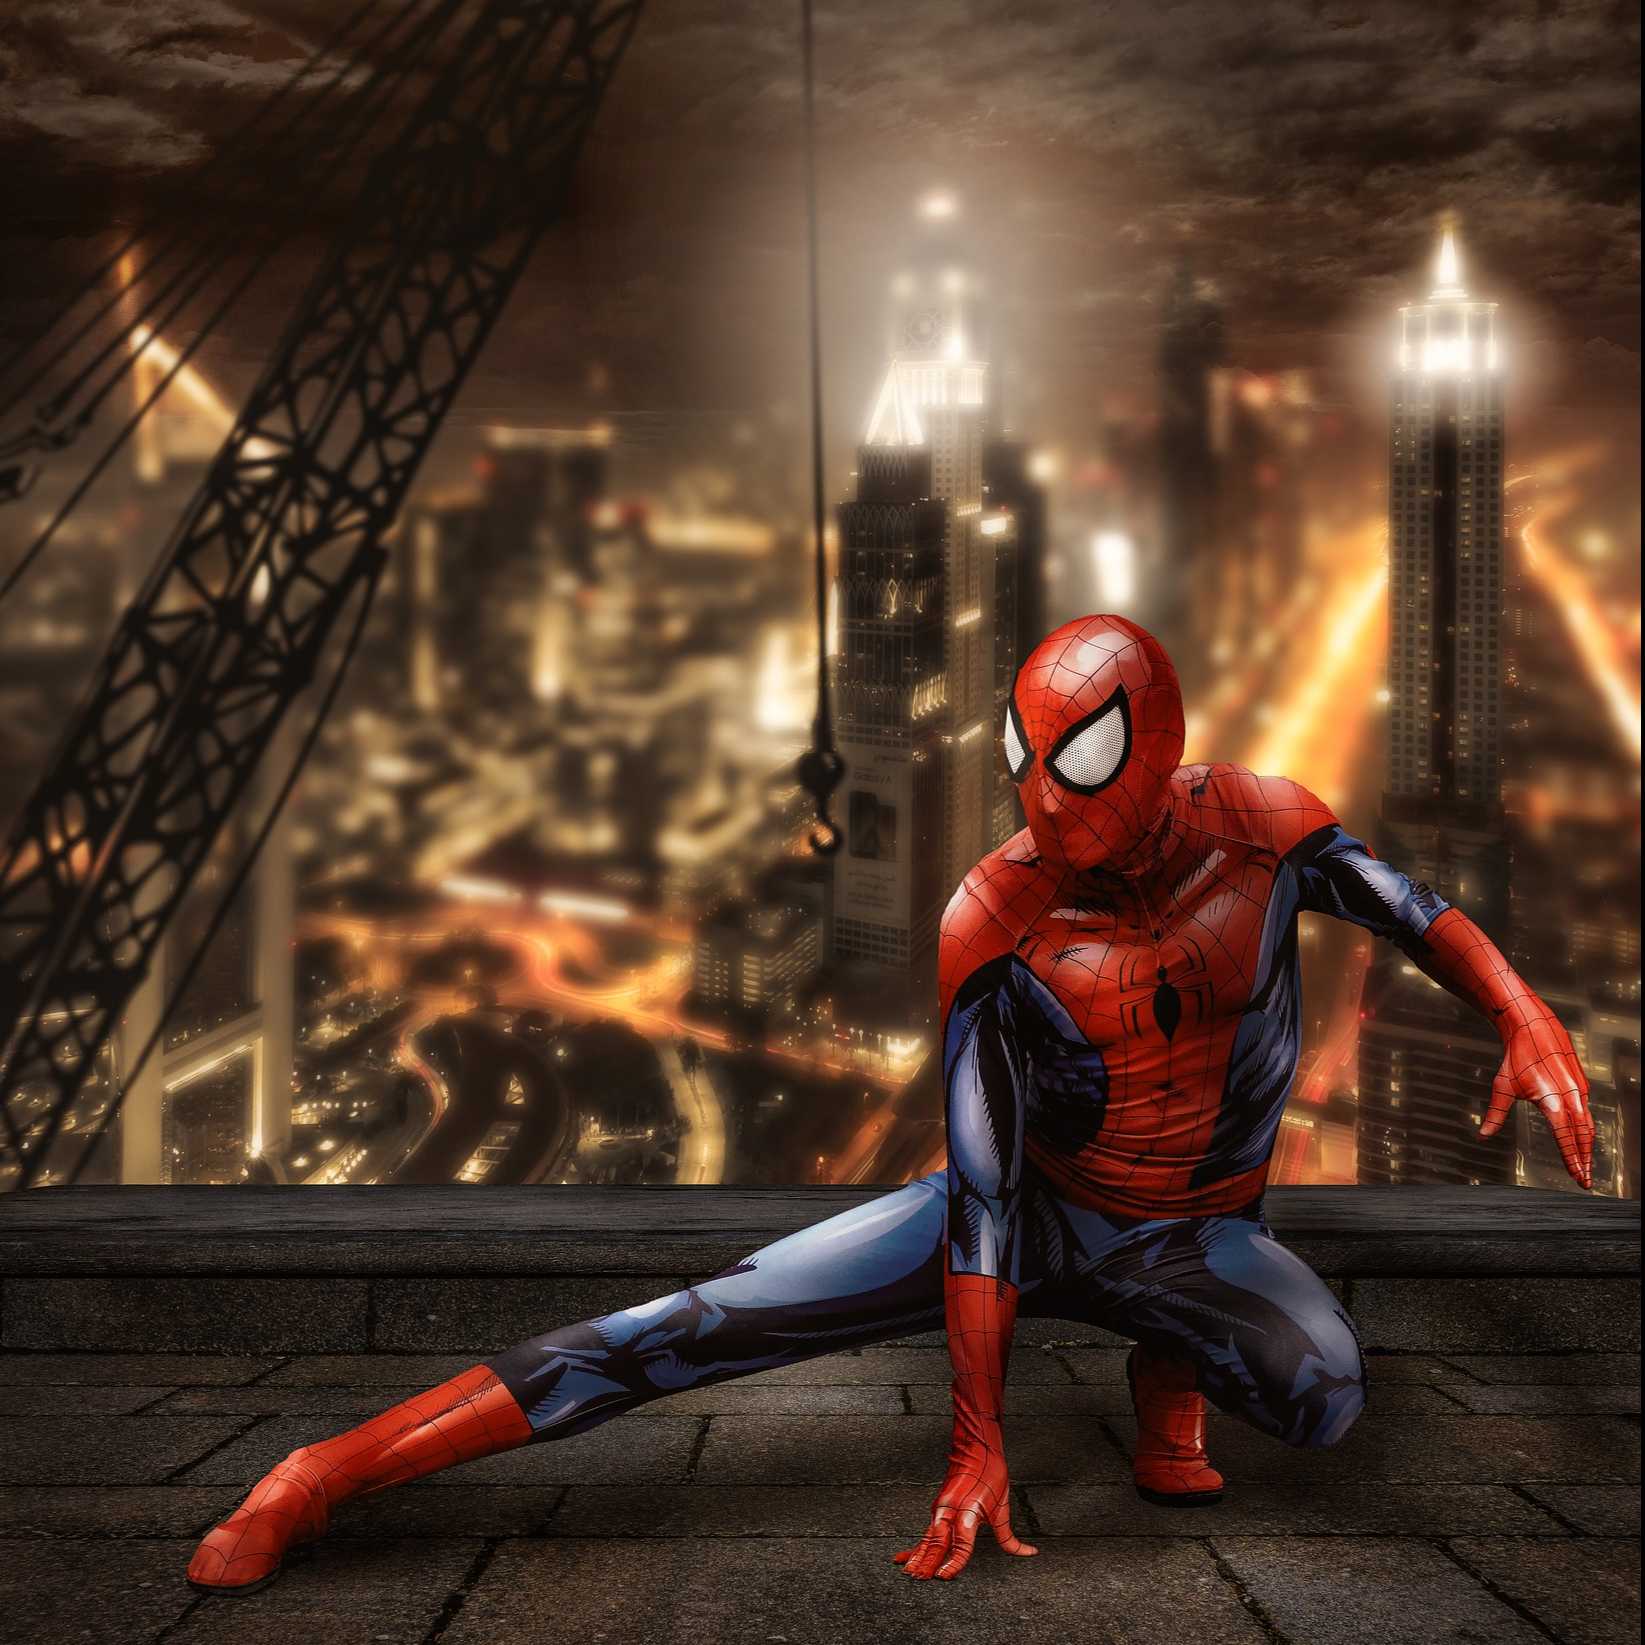 Spiderman at the library Image